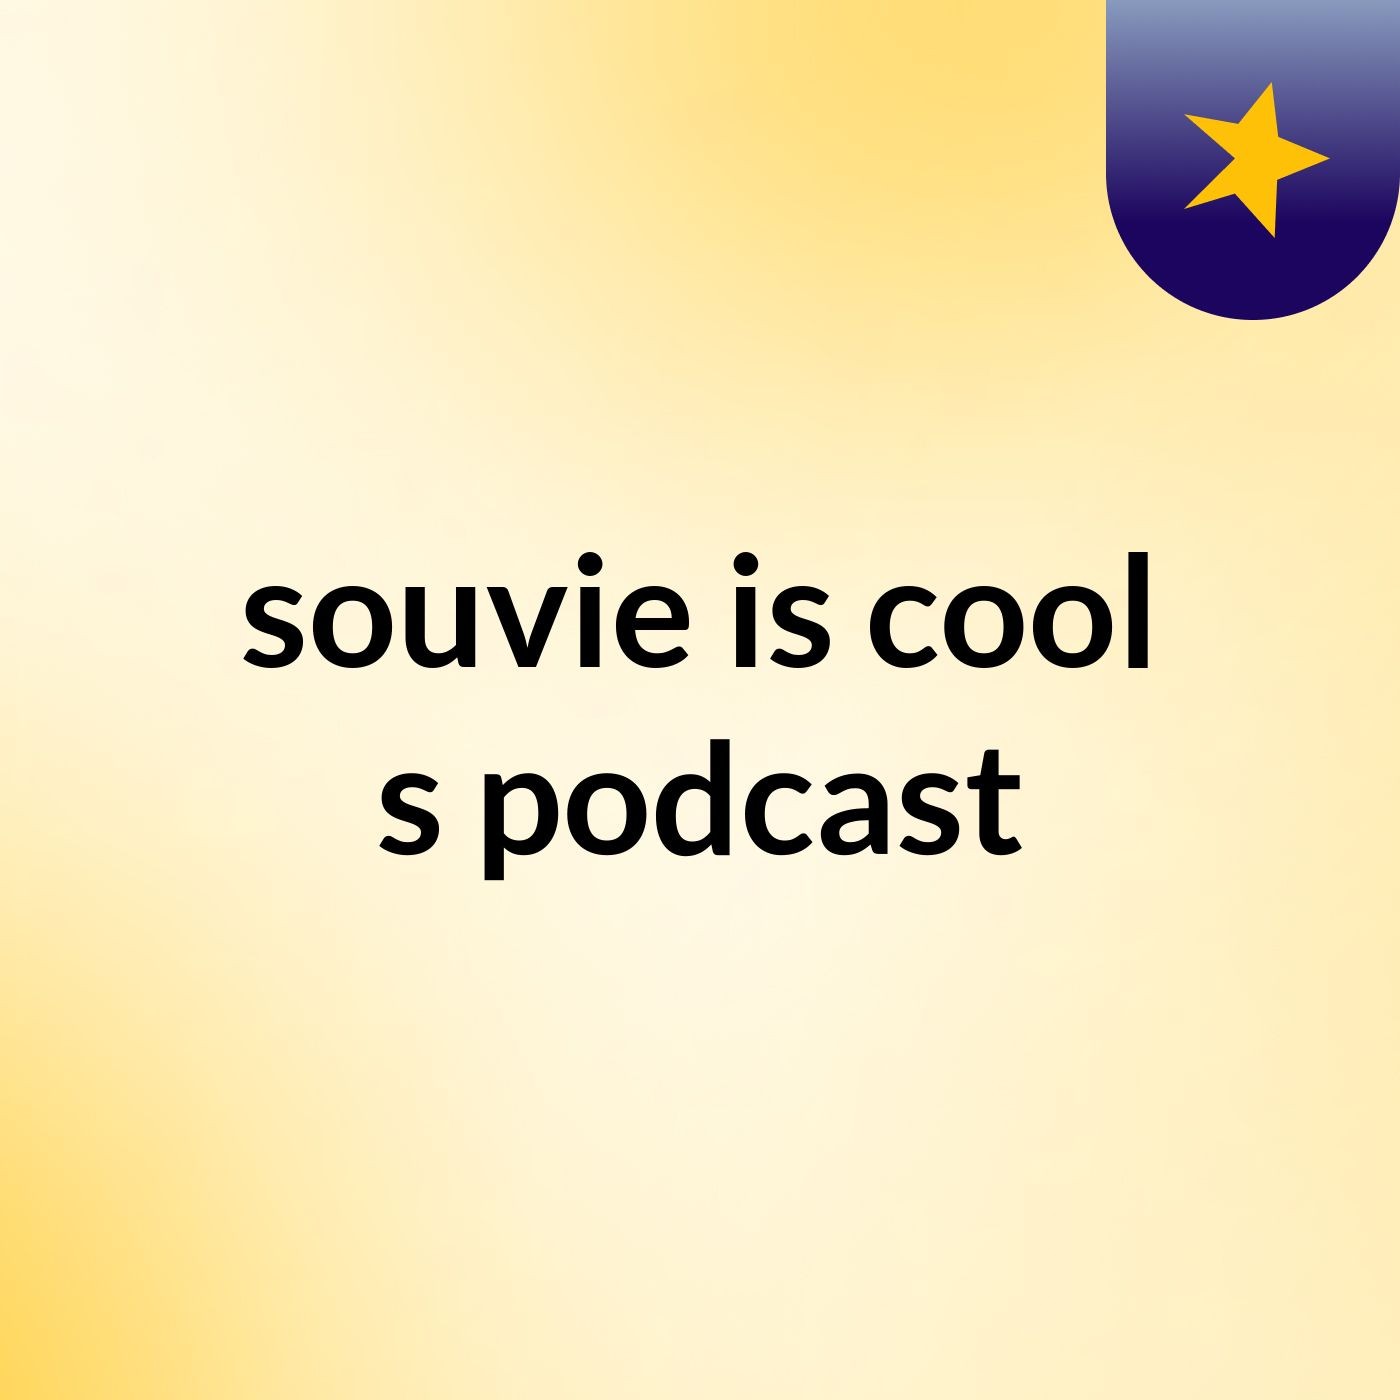 Episode 2 - souvie is cool's podcast